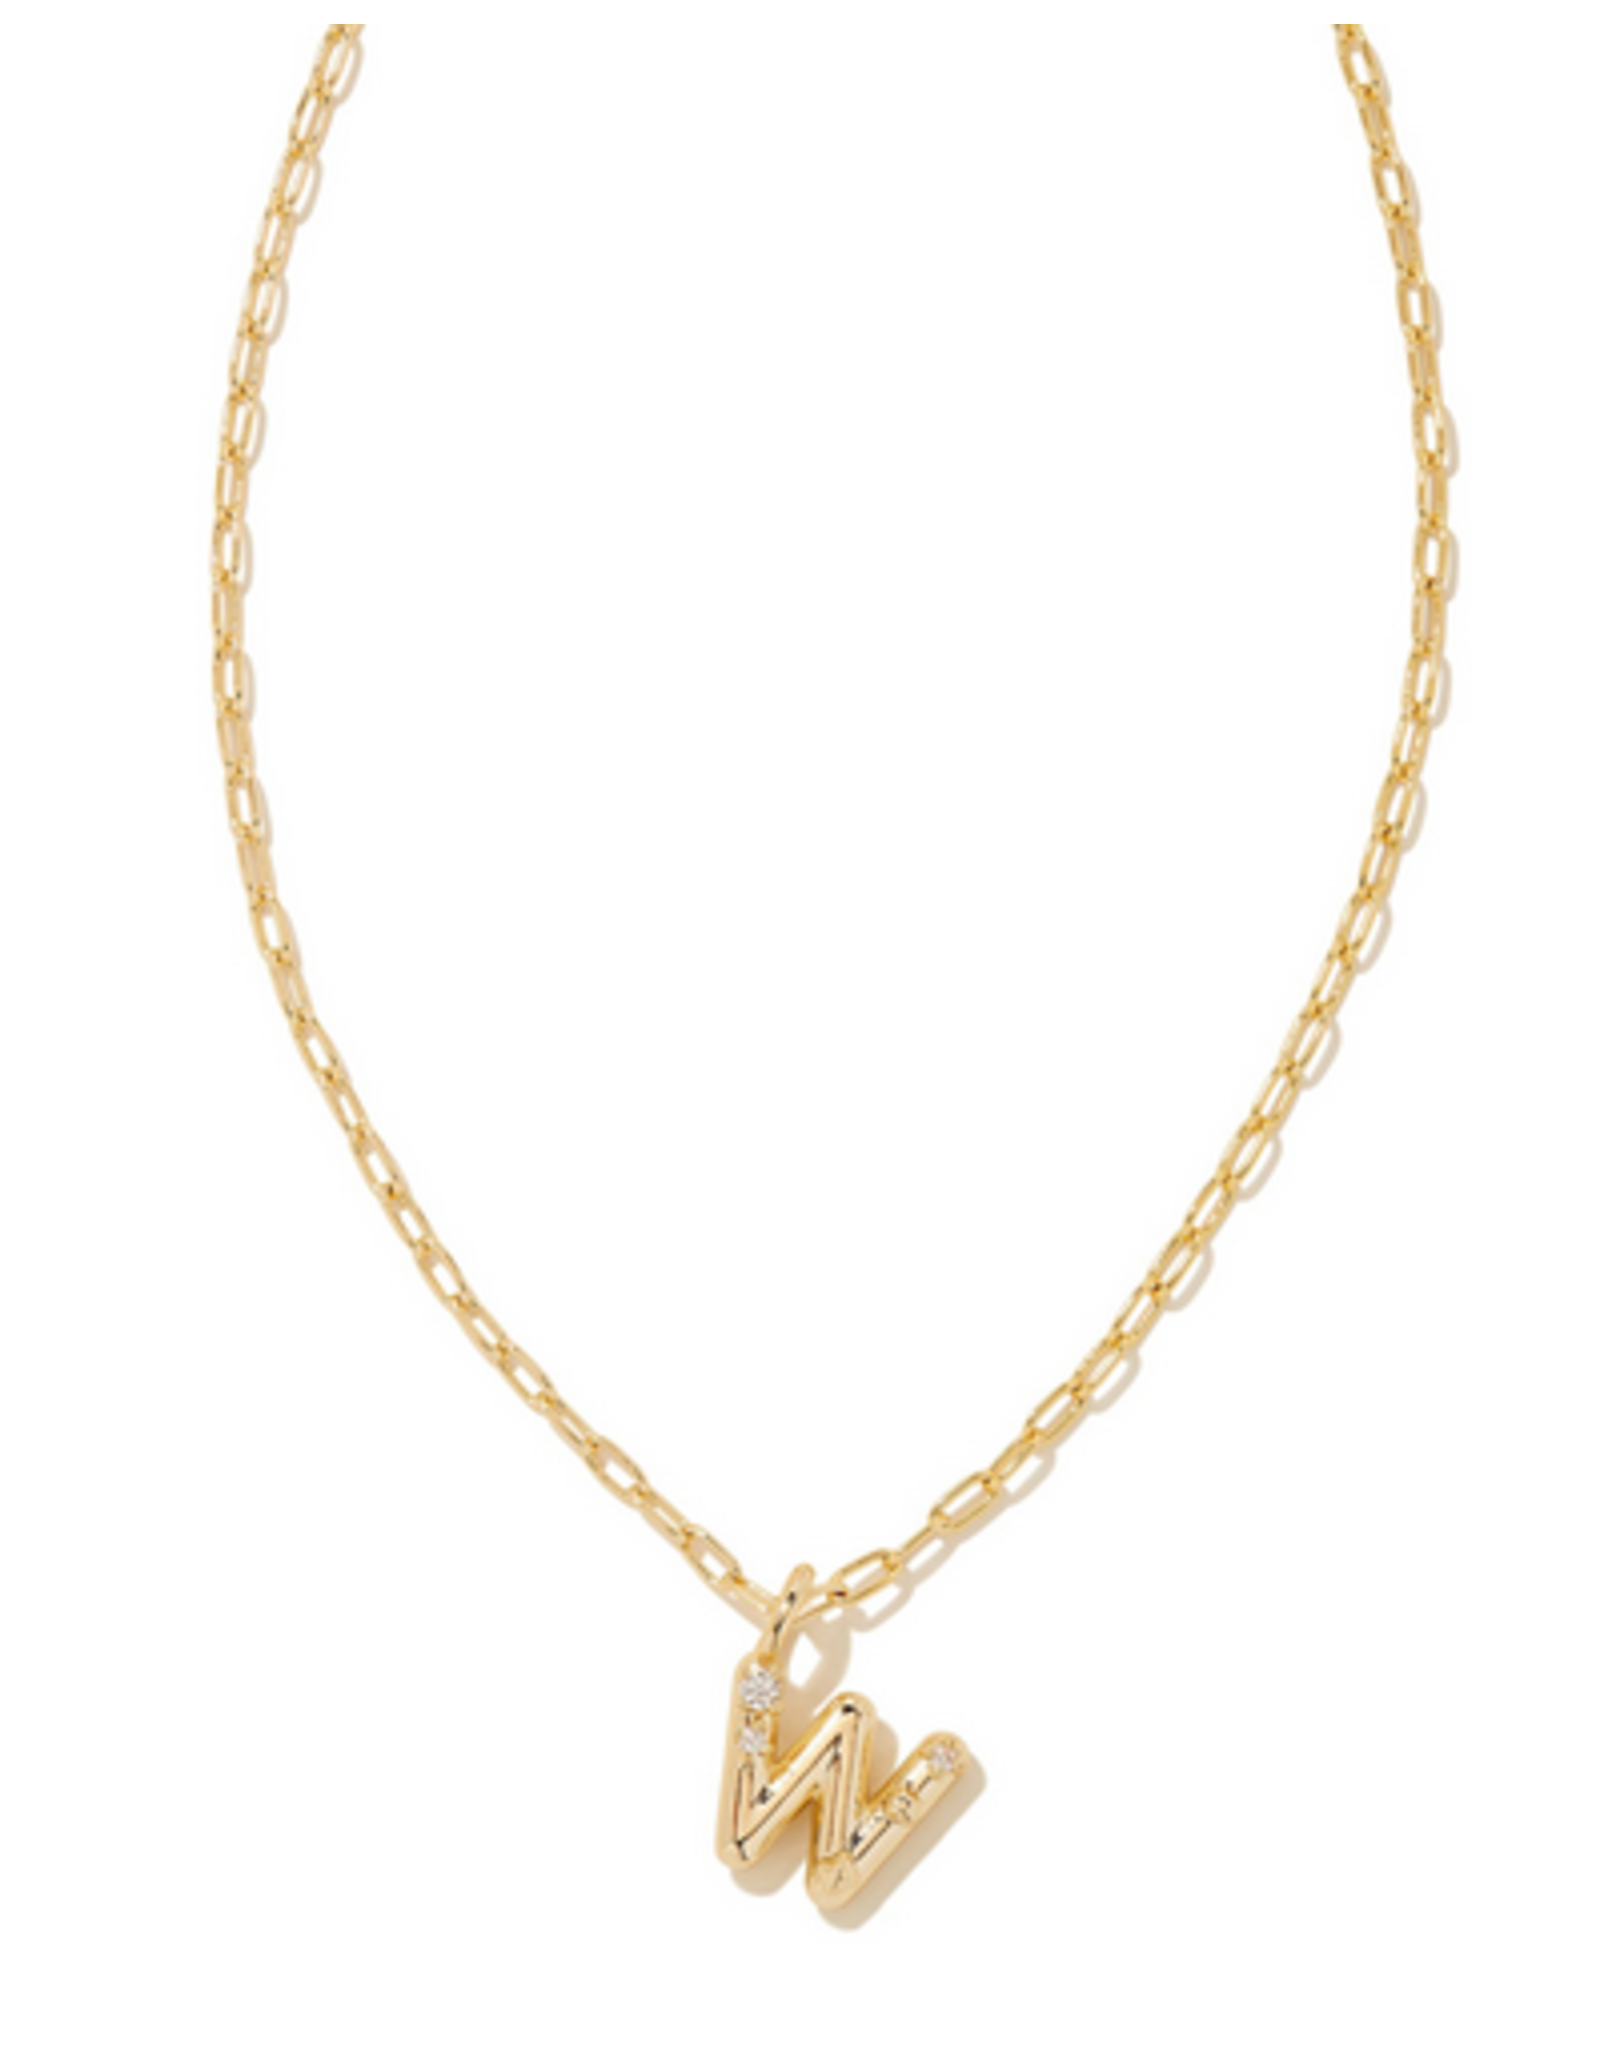 Kendra Scott Crystal Letter W Necklace Gold